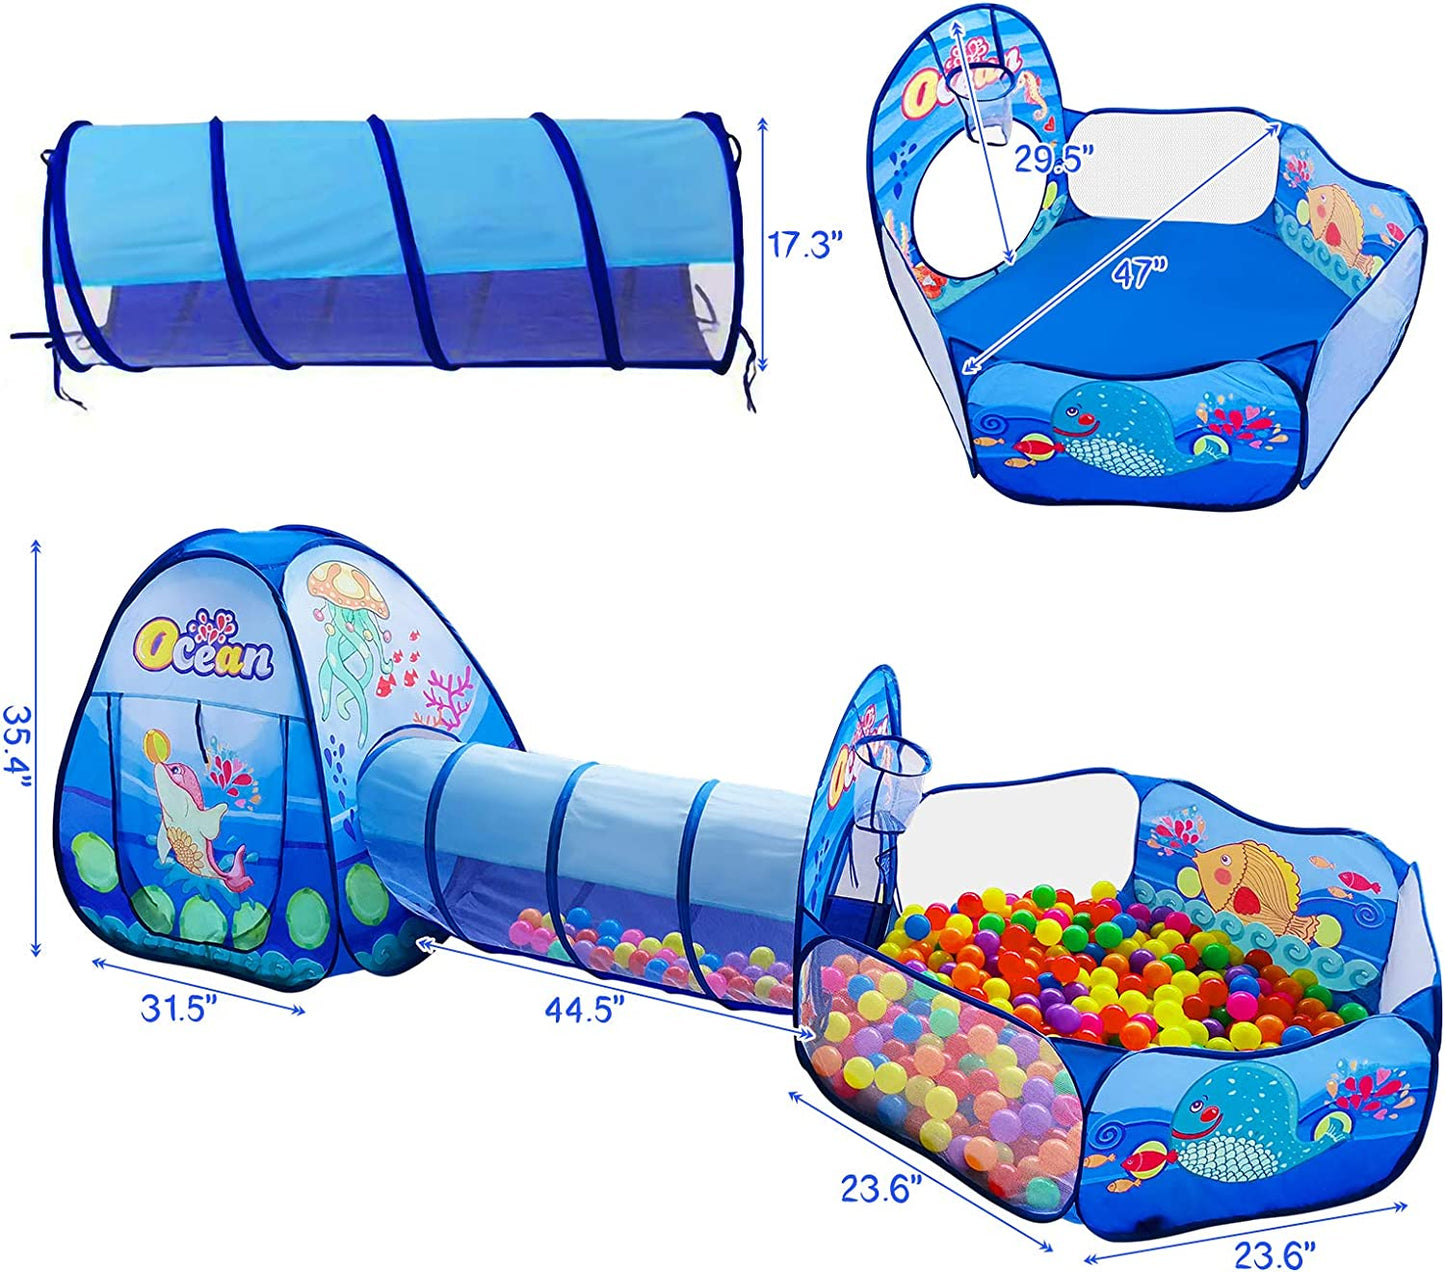 "Ultimate Fun Zone for Kids: 3-In-1 Play Tent, Tunnel, Ball Pit with Basketball Hoop - Perfect Indoor/Outdoor Toy for Boys & Girls - Ideal Gift for 3-Year-Olds"